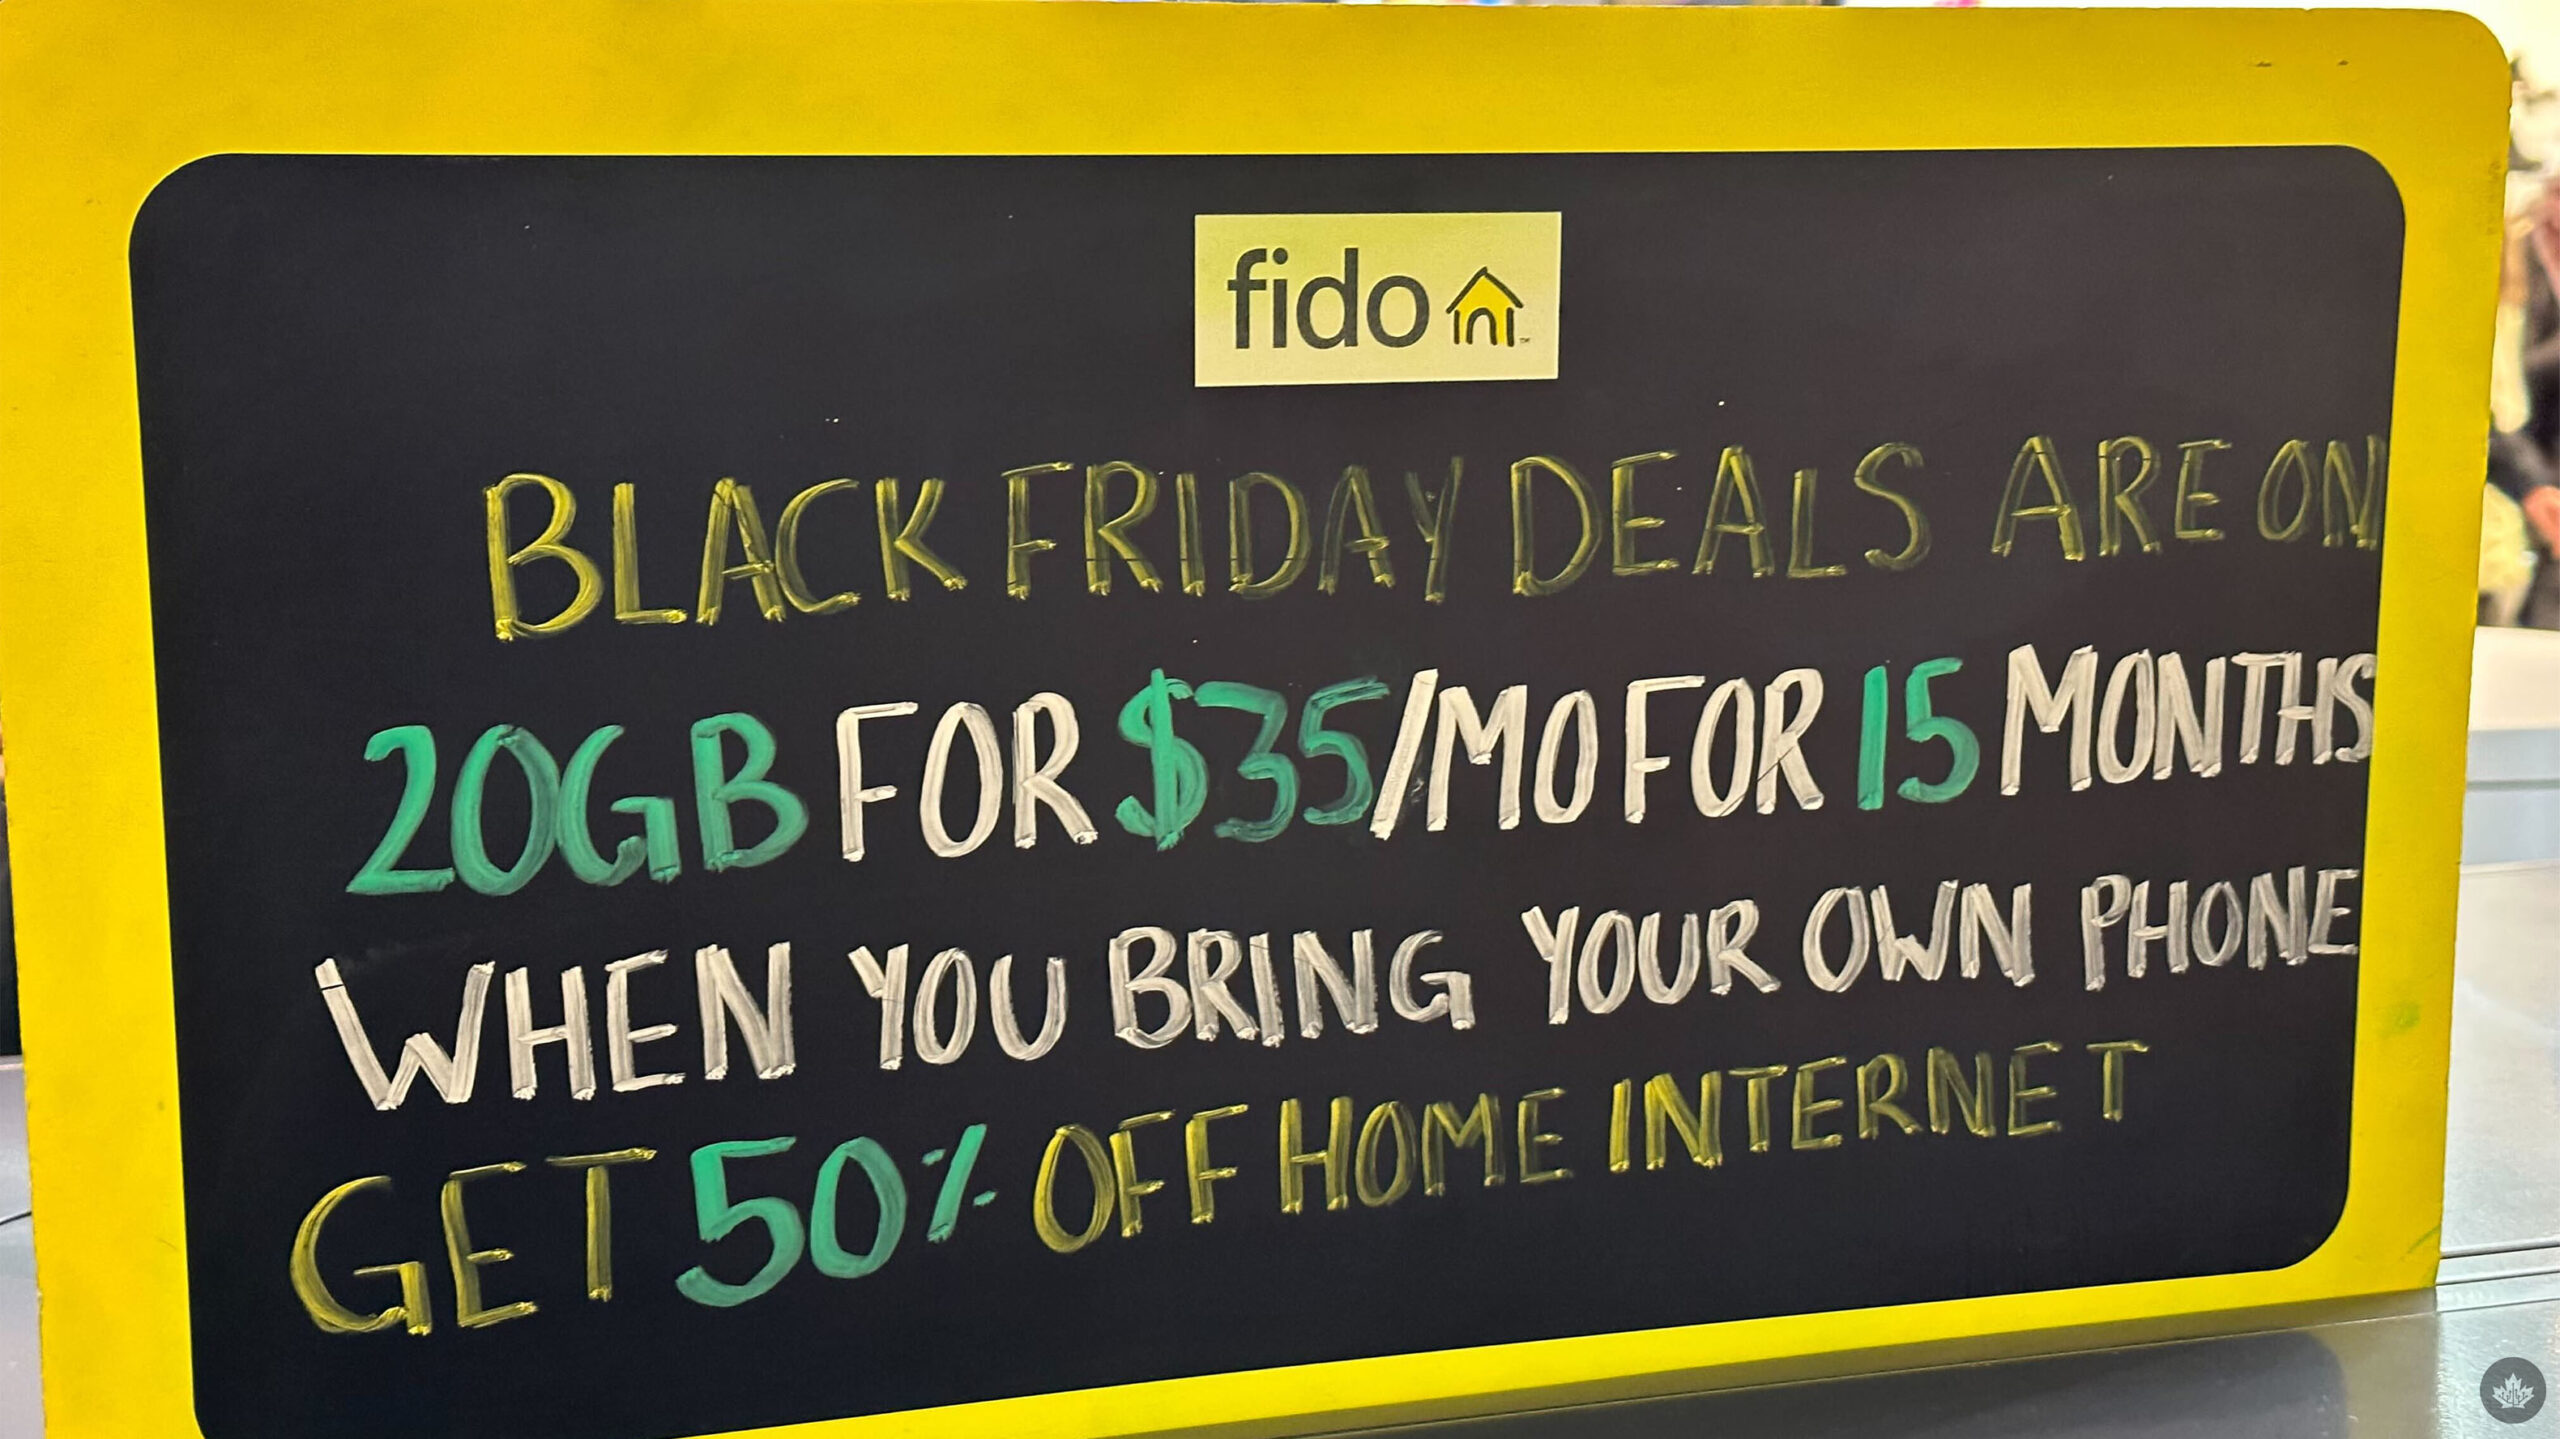 Canadian wireless providers' Black Friday plans haven't impressed